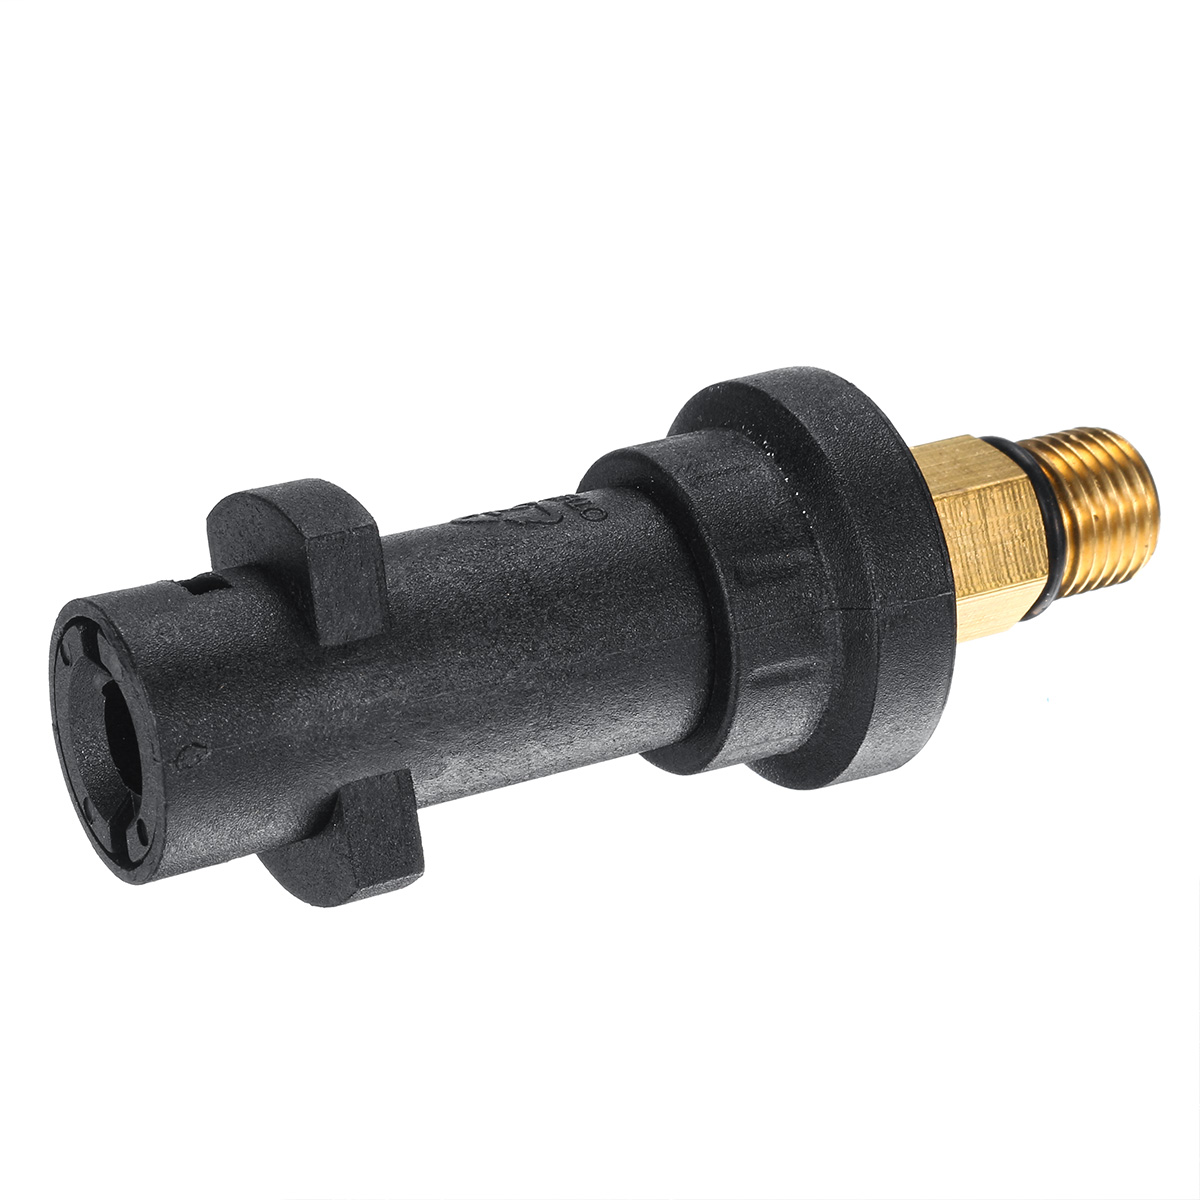 Pressure-Washer-Extension-Lance-Wand-14quot-M22-Quick-Connect-Adapter-Hose-G-un-Fit-1555252-7